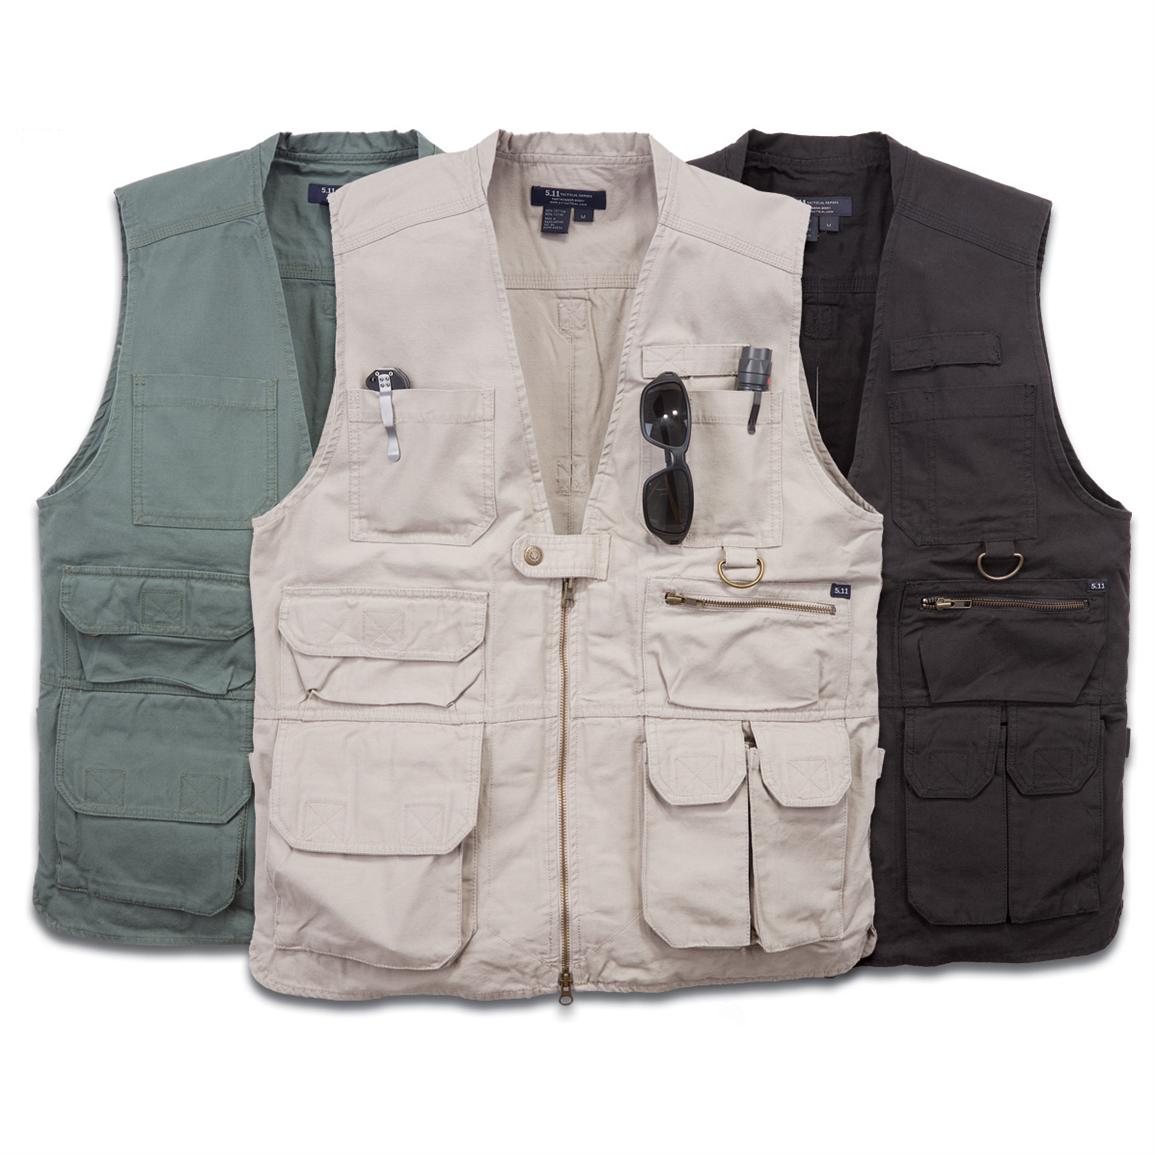 5.11 Tactical® Vest - 165479, Tactical Clothing at Sportsman's Guide